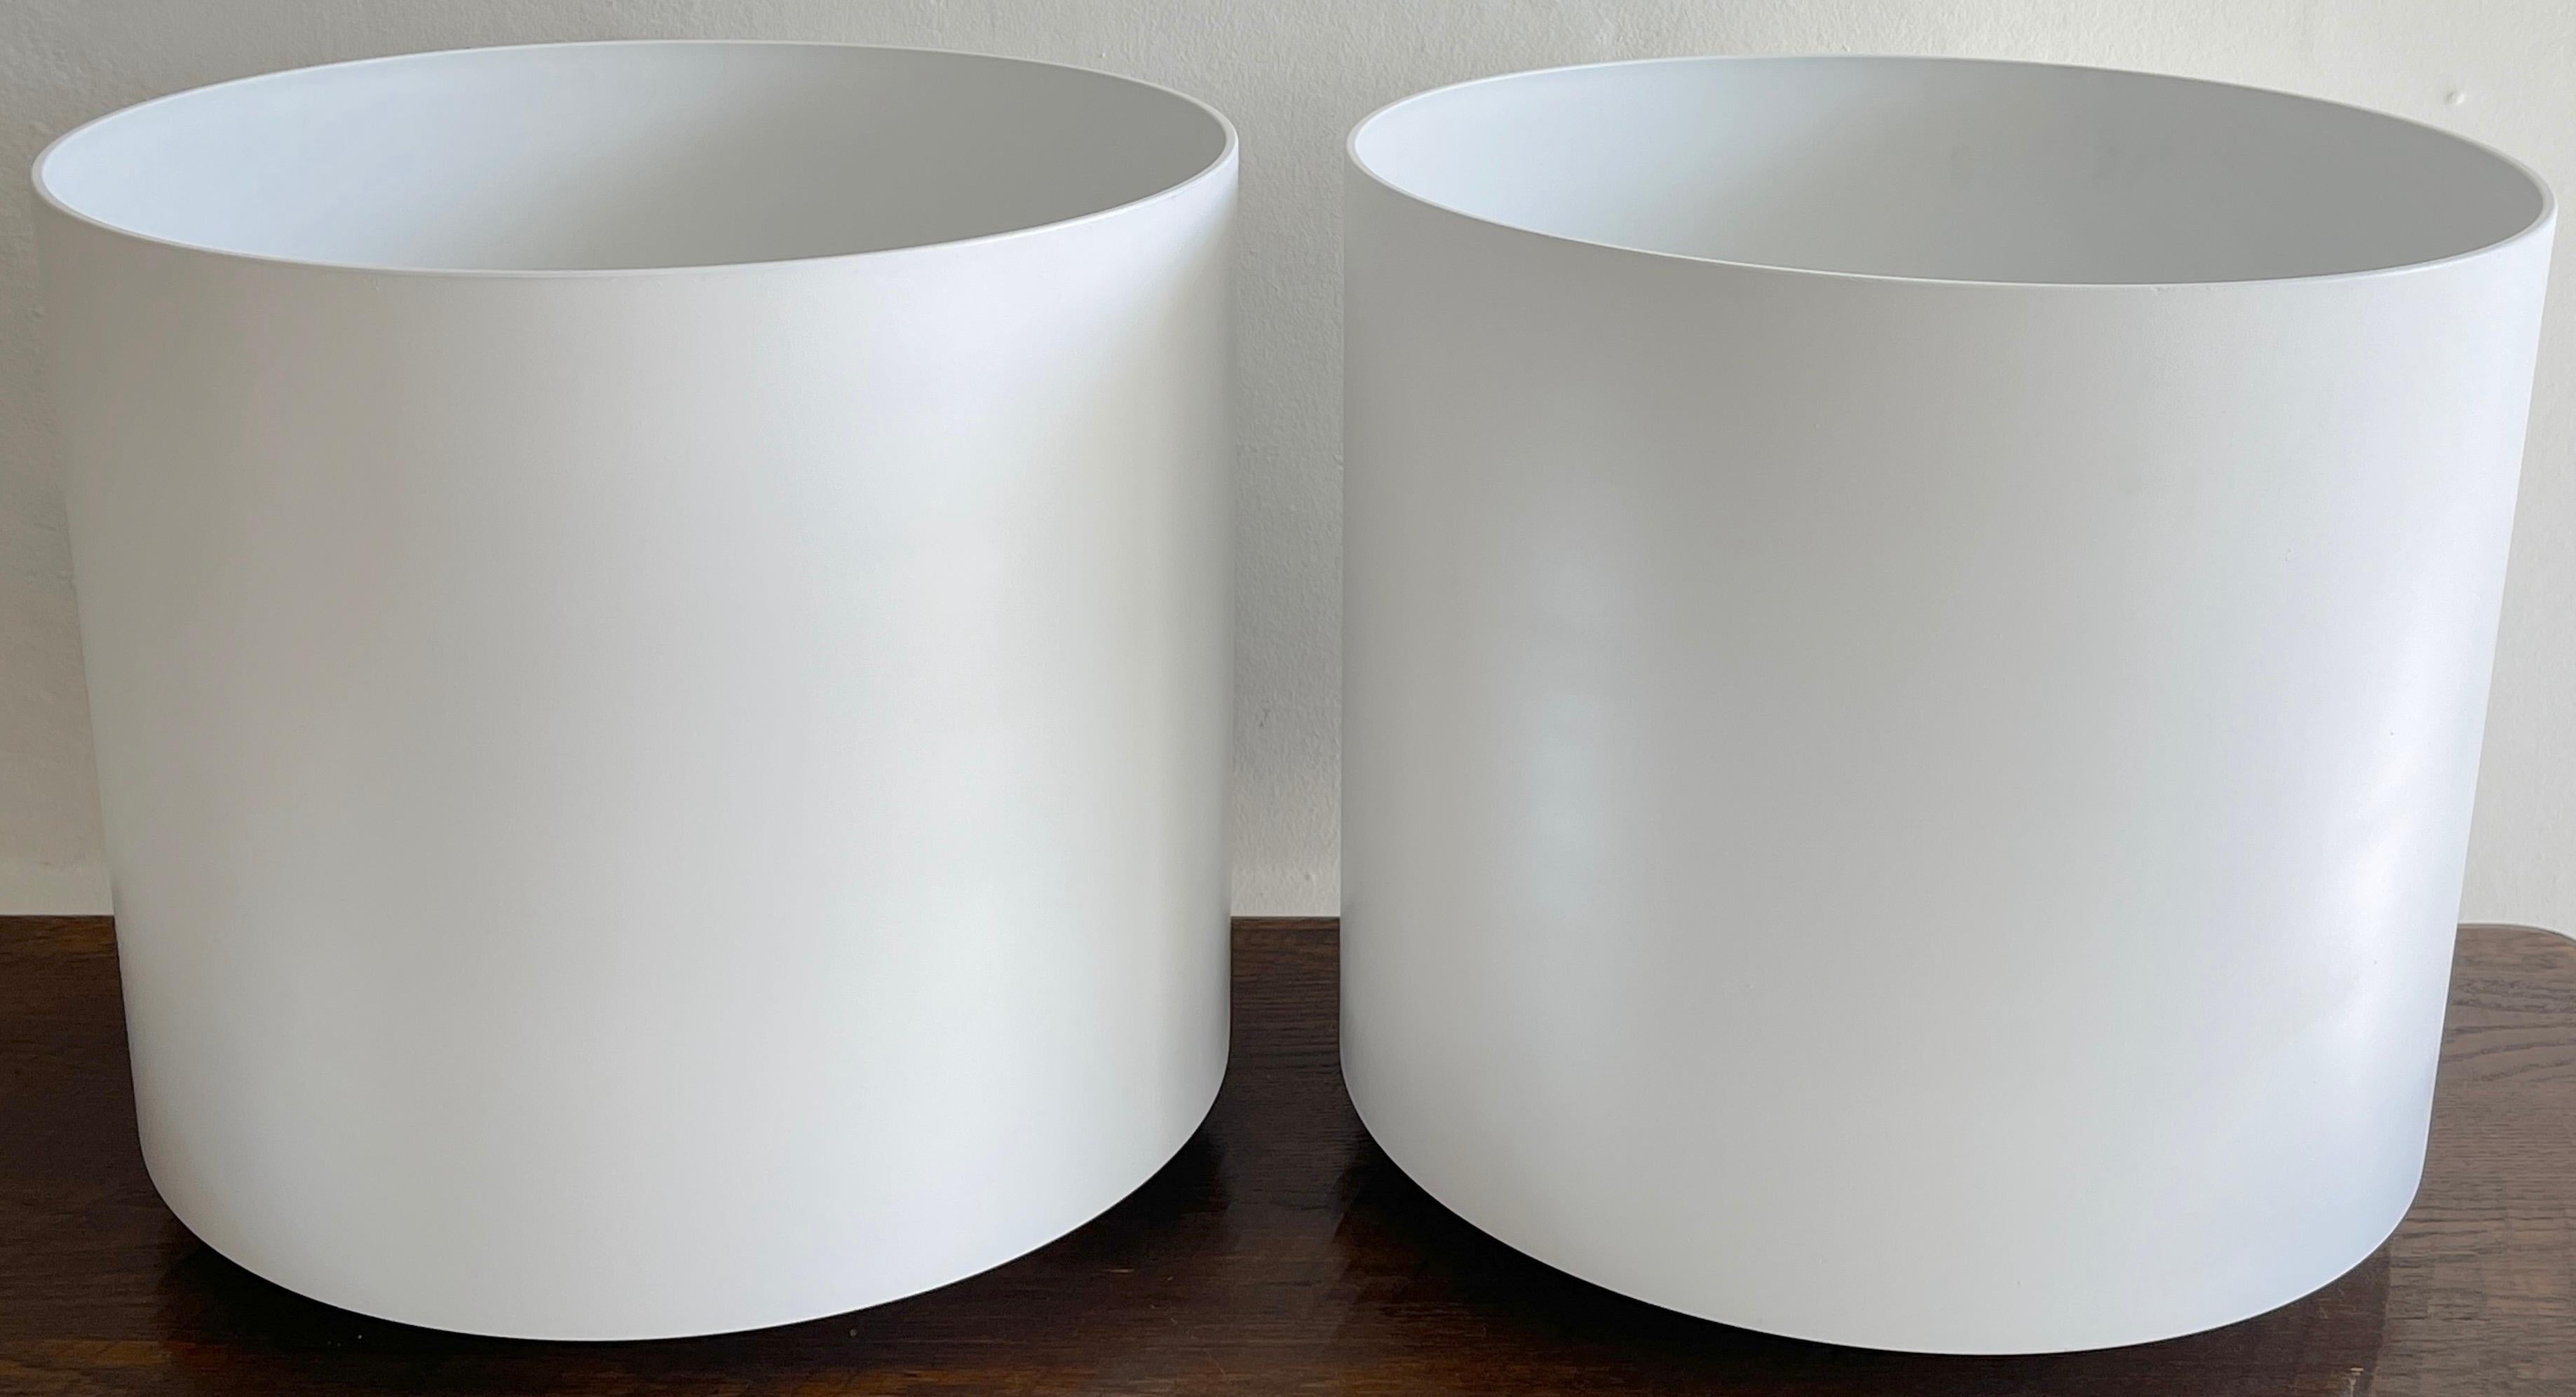 Pair of Italian Modern white lacquered fiberglas planters, Each one a sleek circular drum with tapering pedestal 14.5 Inch diameter base, with numerous drain holes. 
    